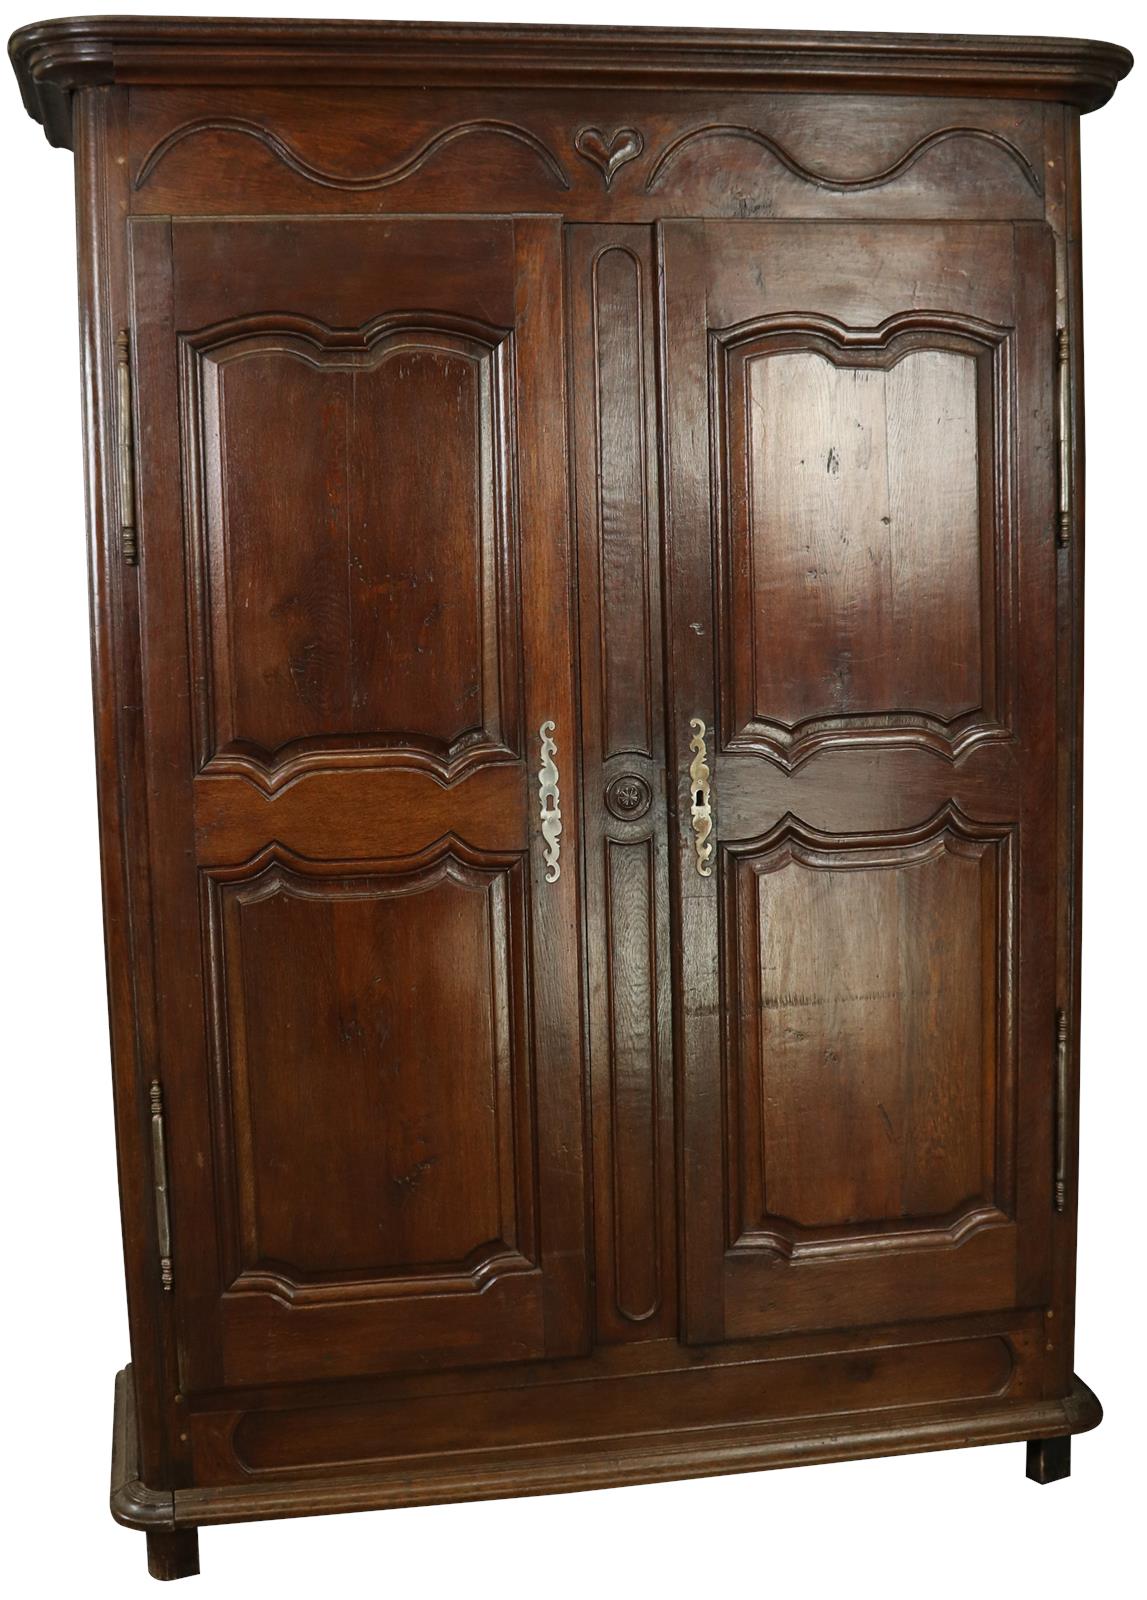 Armoire Antique French Provincial Very Old 1790 Oak Wood Peg Construction Heart -Image 1